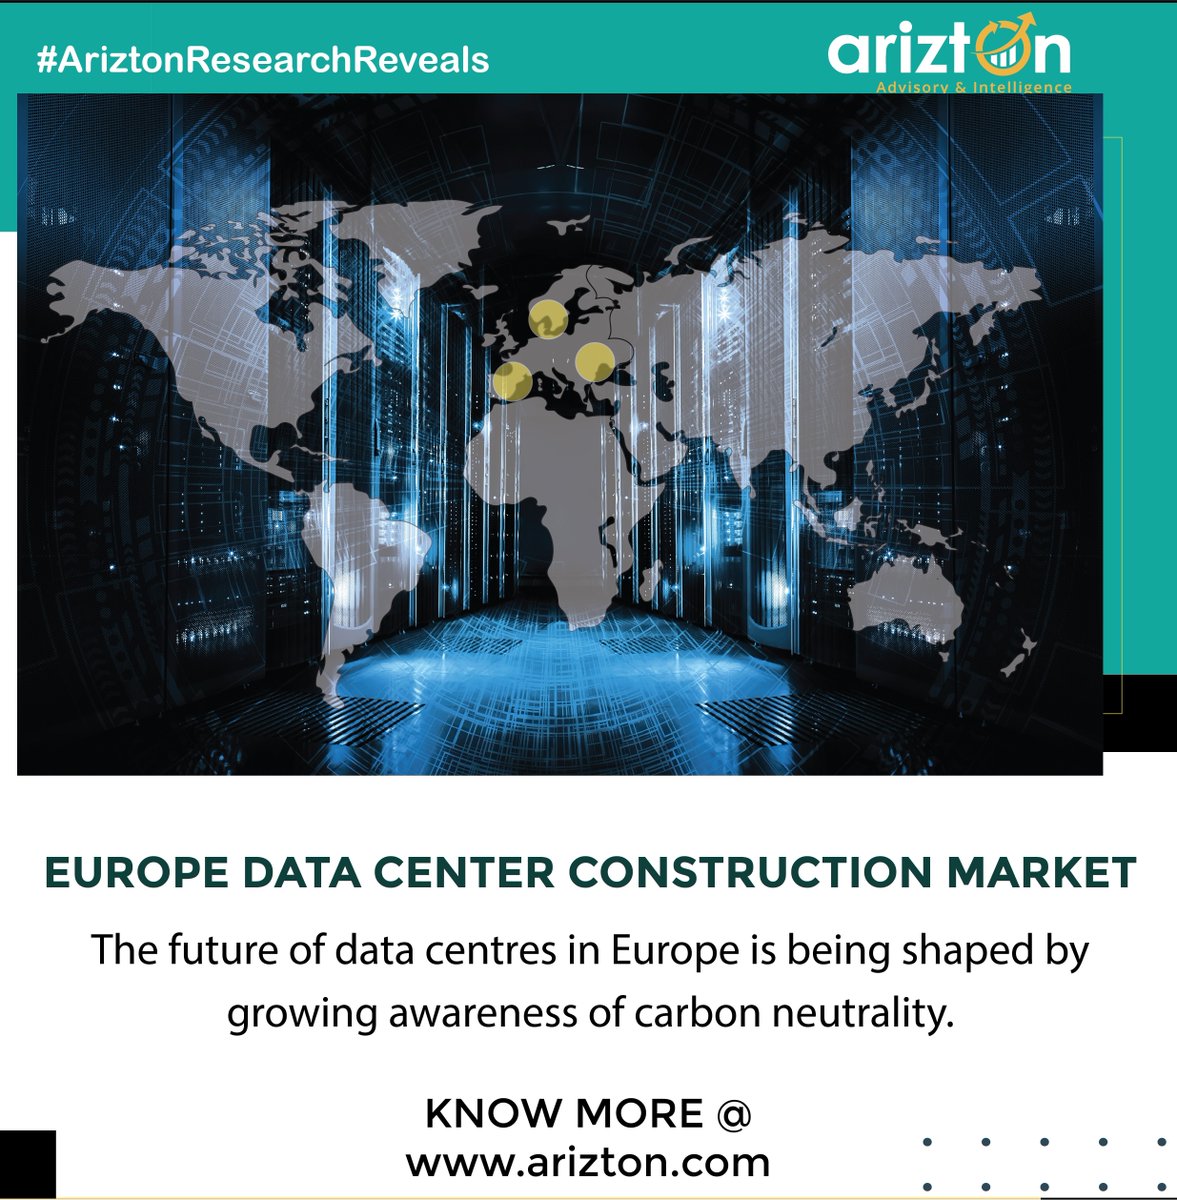 #Europe has abundant #renewableenergy sources such as wind, geothermal, and hydro. Operators are aligning their goals with carbon-neutral goals...Read more @ arizton.com/market-reports…

#datacenterworld #datacentersolutions #datacenterinfrastructure #ariztonresearchreveals